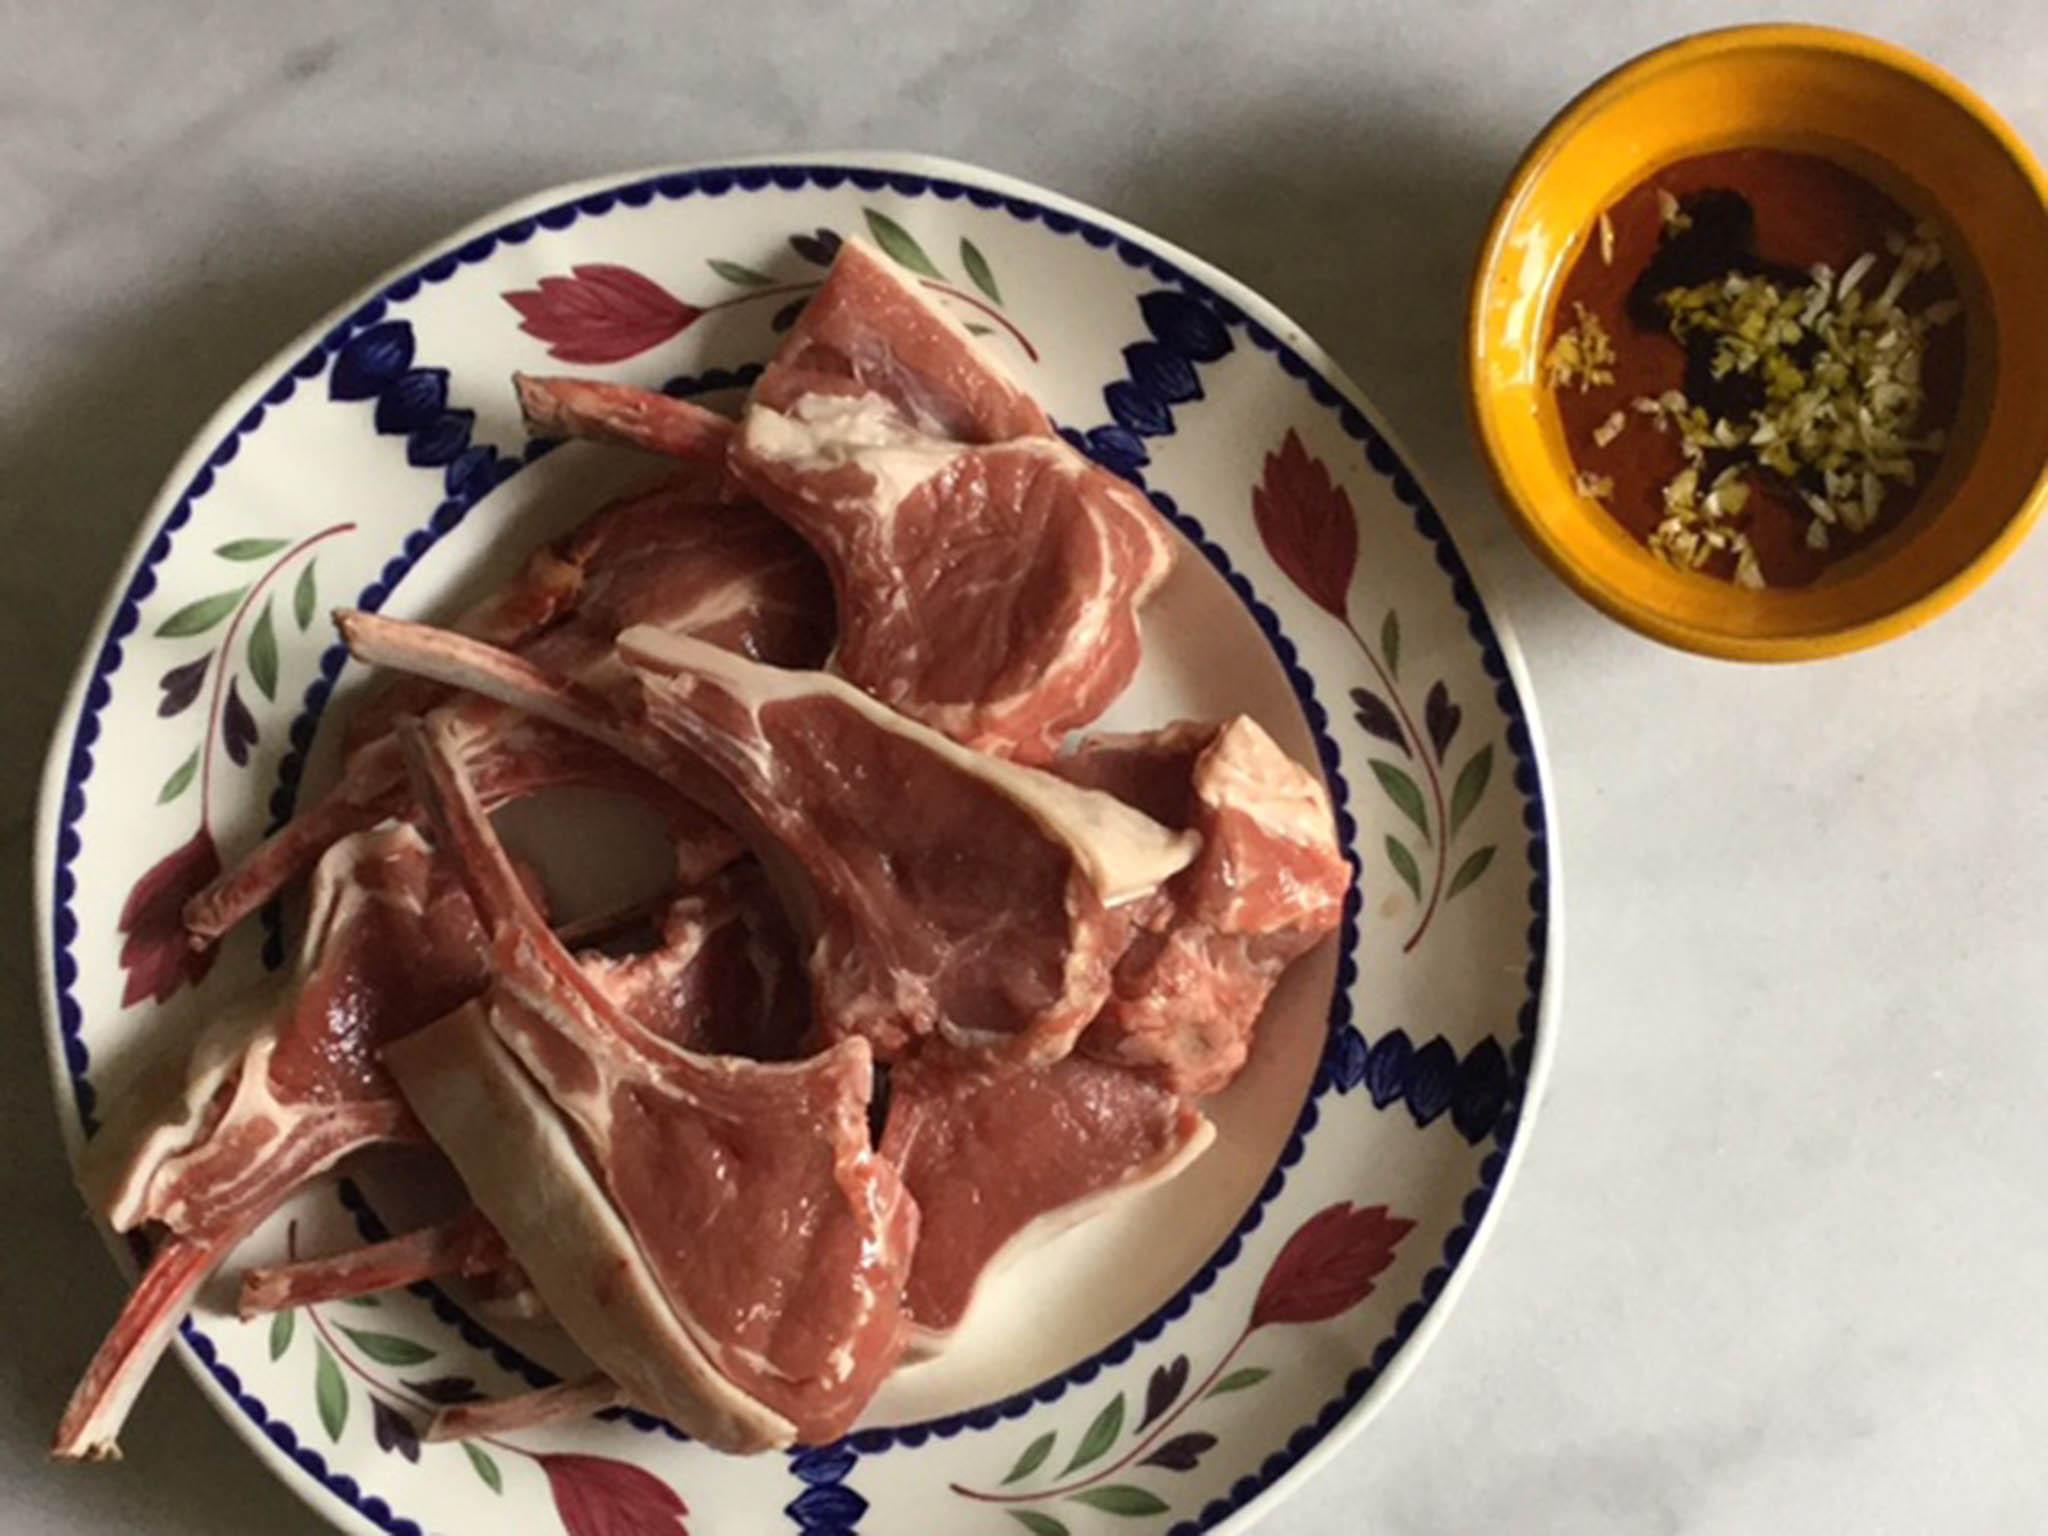 A harissa marinade for the meat is a little more sophisticated than a simple olive oil and thyme mixture